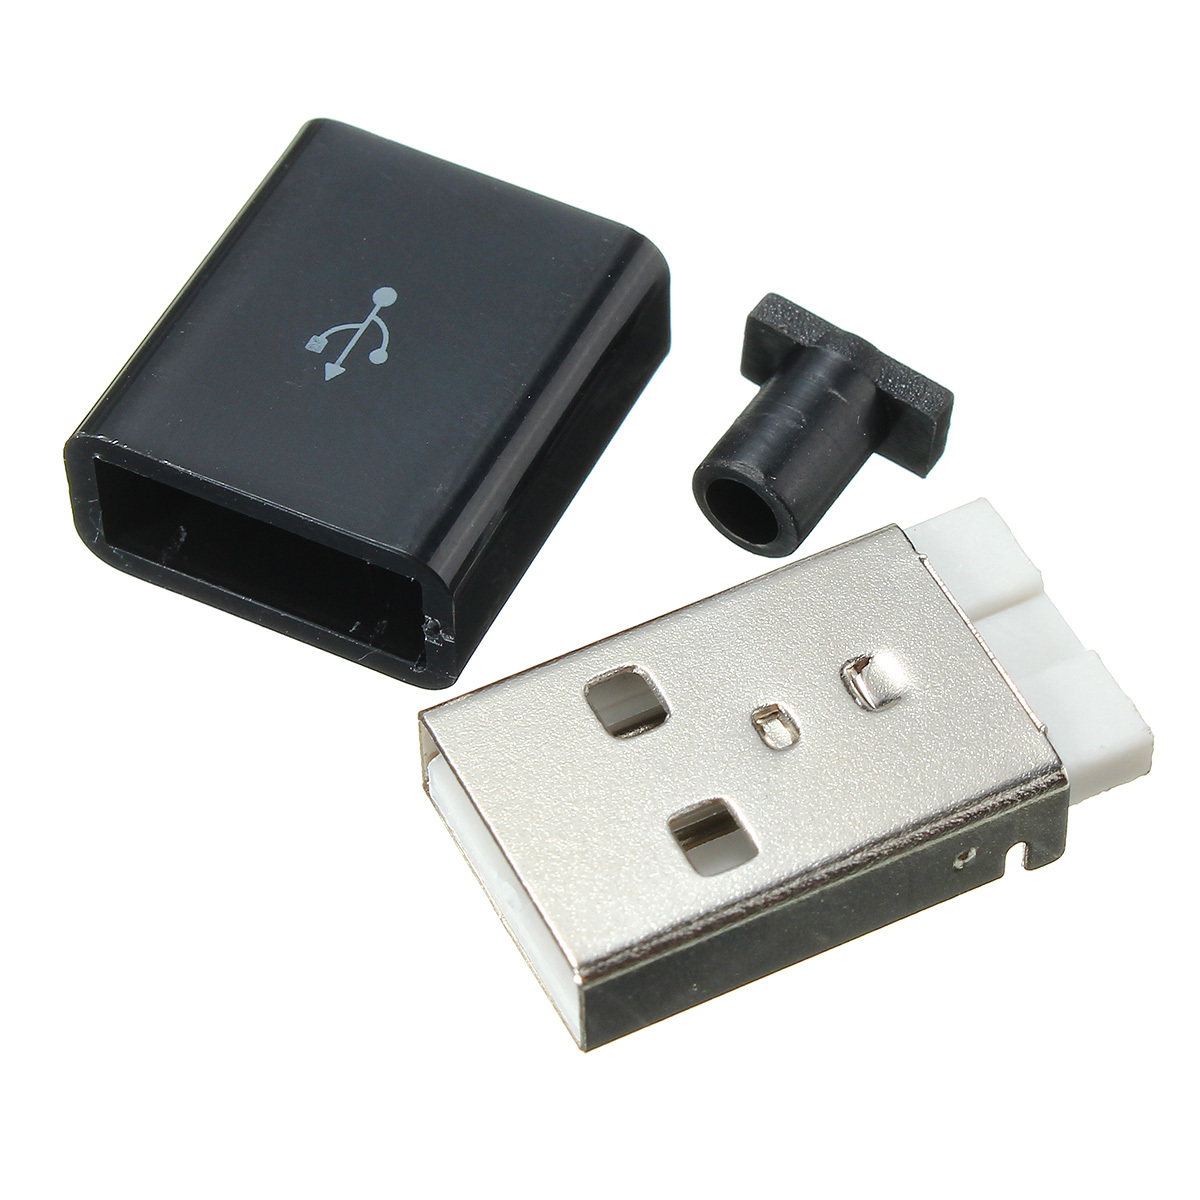 1Pcs USB 2.0 Type A Plug 4-pin Male Adapter Solder Connector & Black Cover Square 1